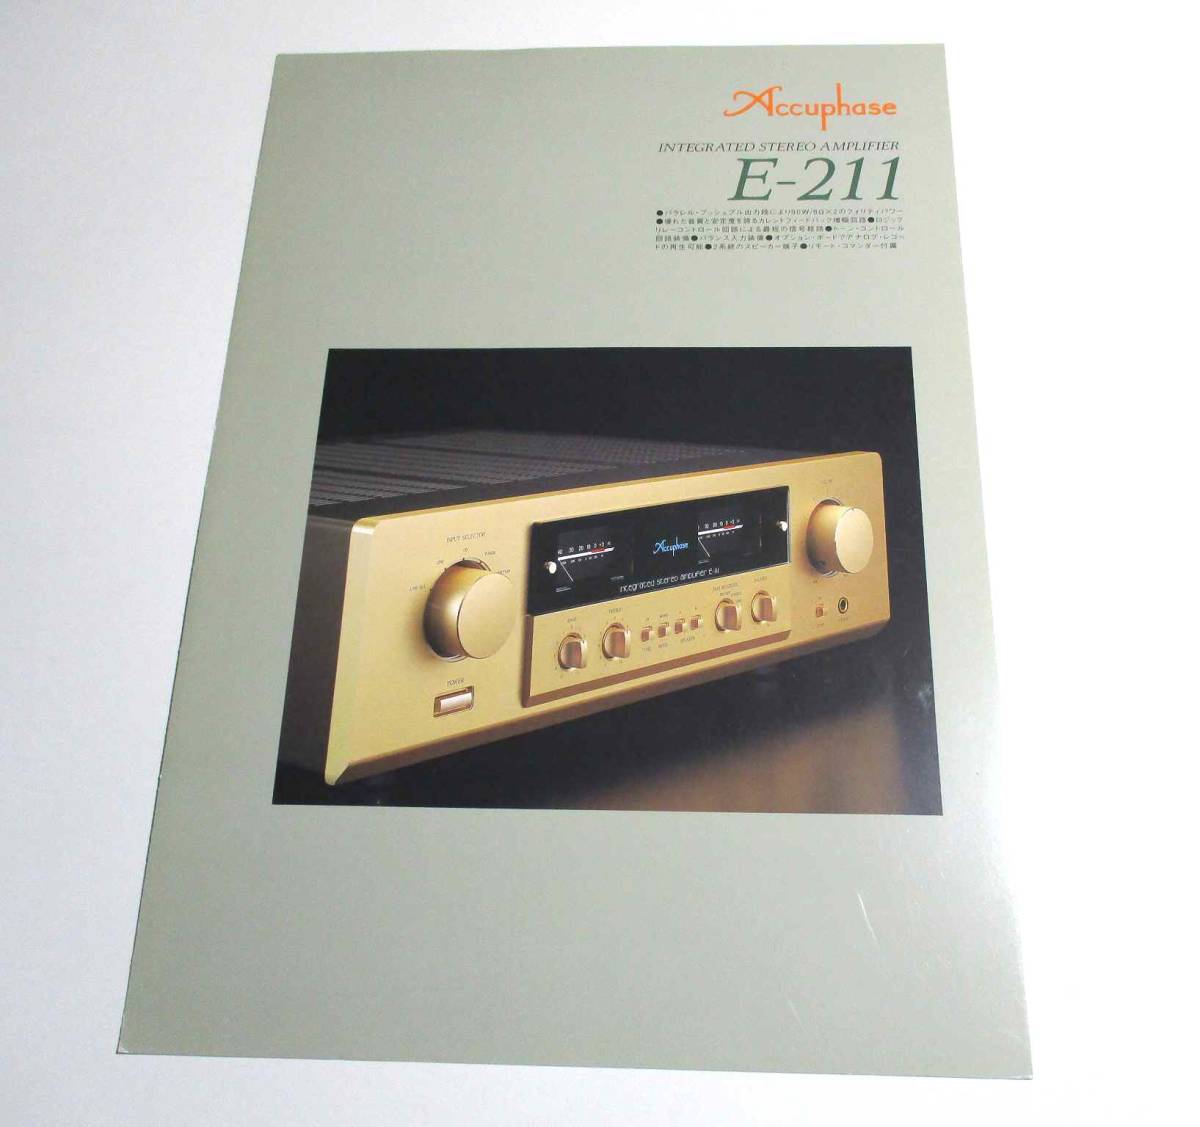 * Accuphase E-211 < single goods catalog > 1998 year version 